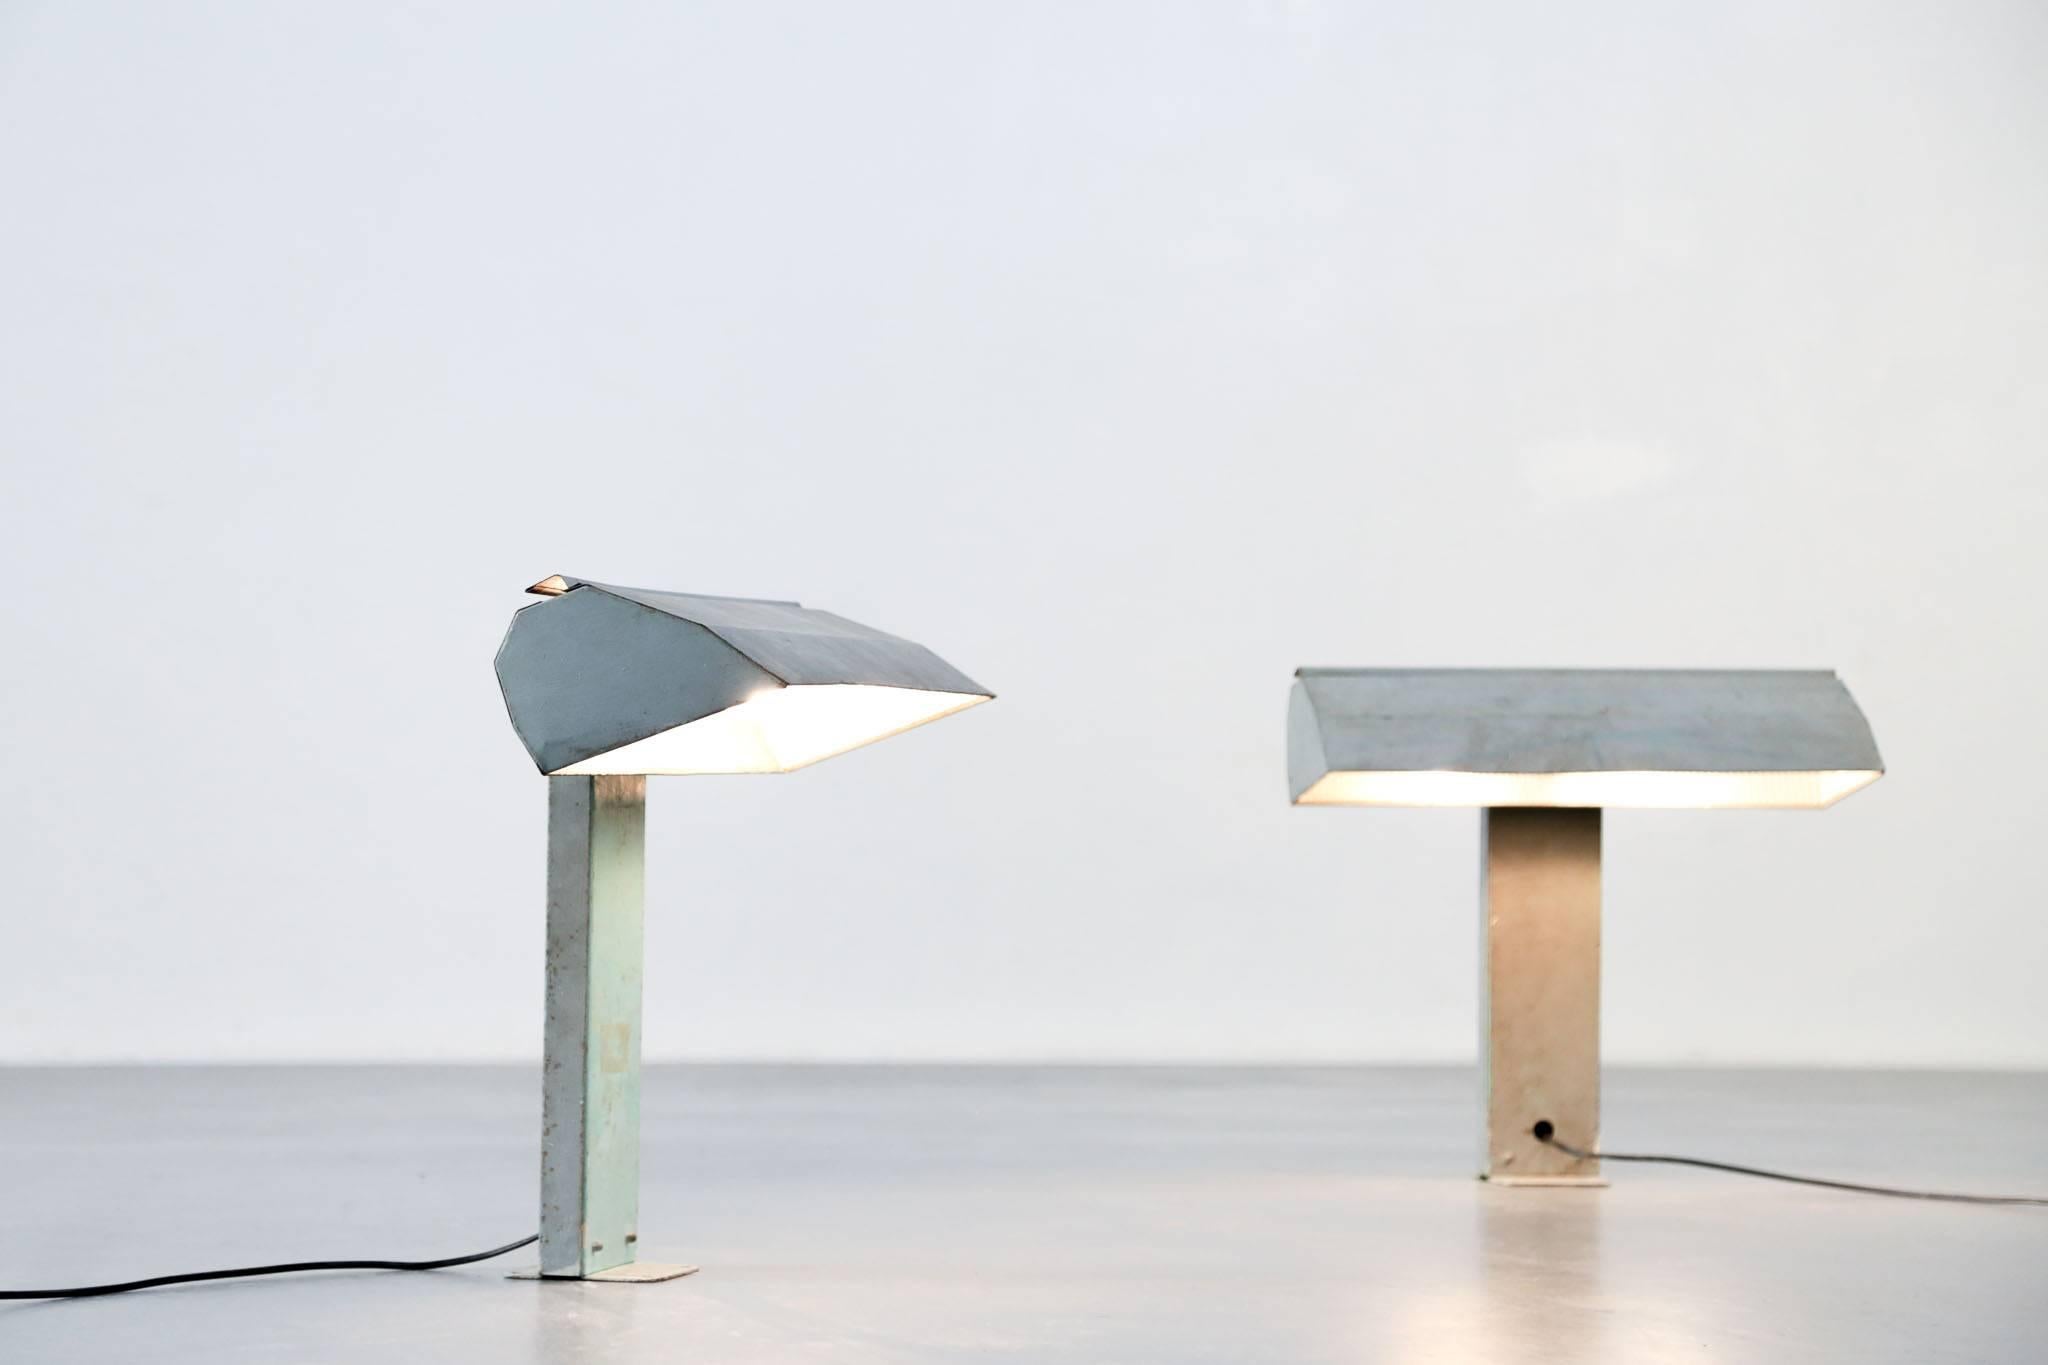 Mid-20th Century Pair of Sconces, Wall Lights in the Style of Le Corbusier, Pierre Jeanneret